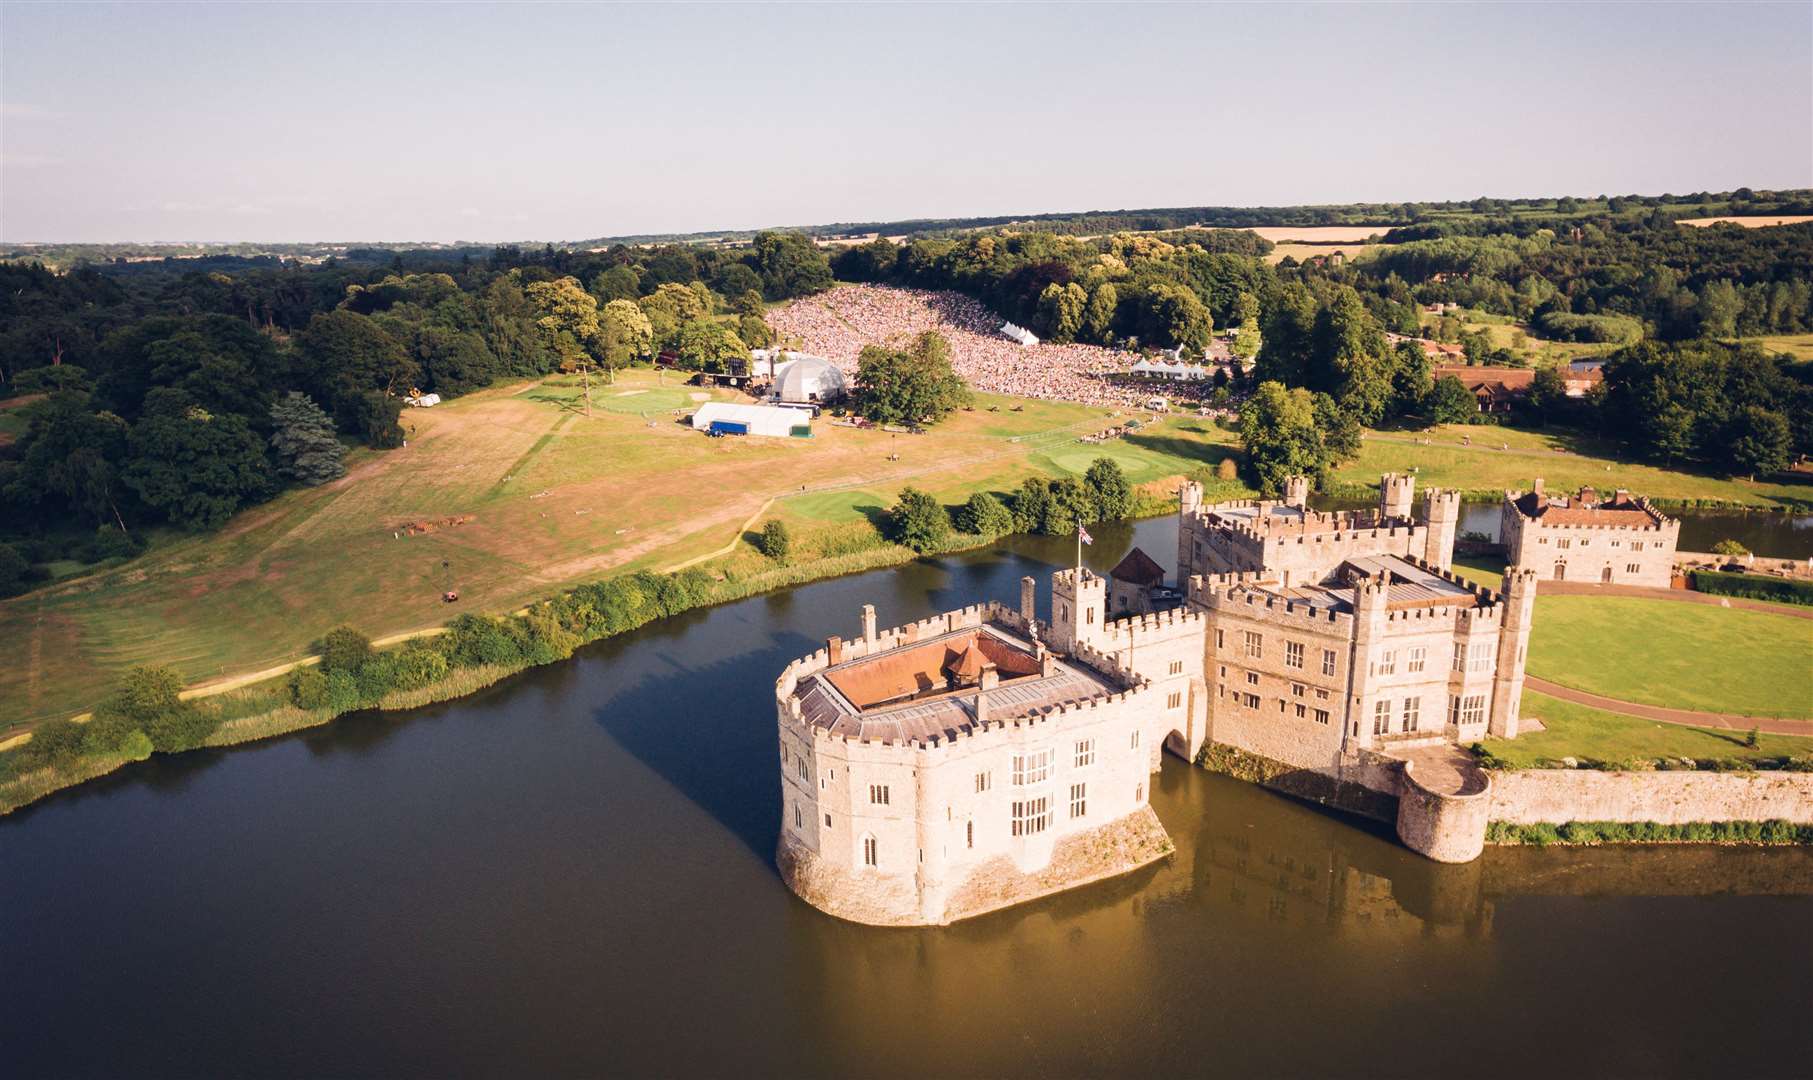 Set in the most spectacular location and natural amphitheatre in front of the beautiful Leeds Castle, The Leeds Castle Classical Concert will take place on Saturday, July 13.